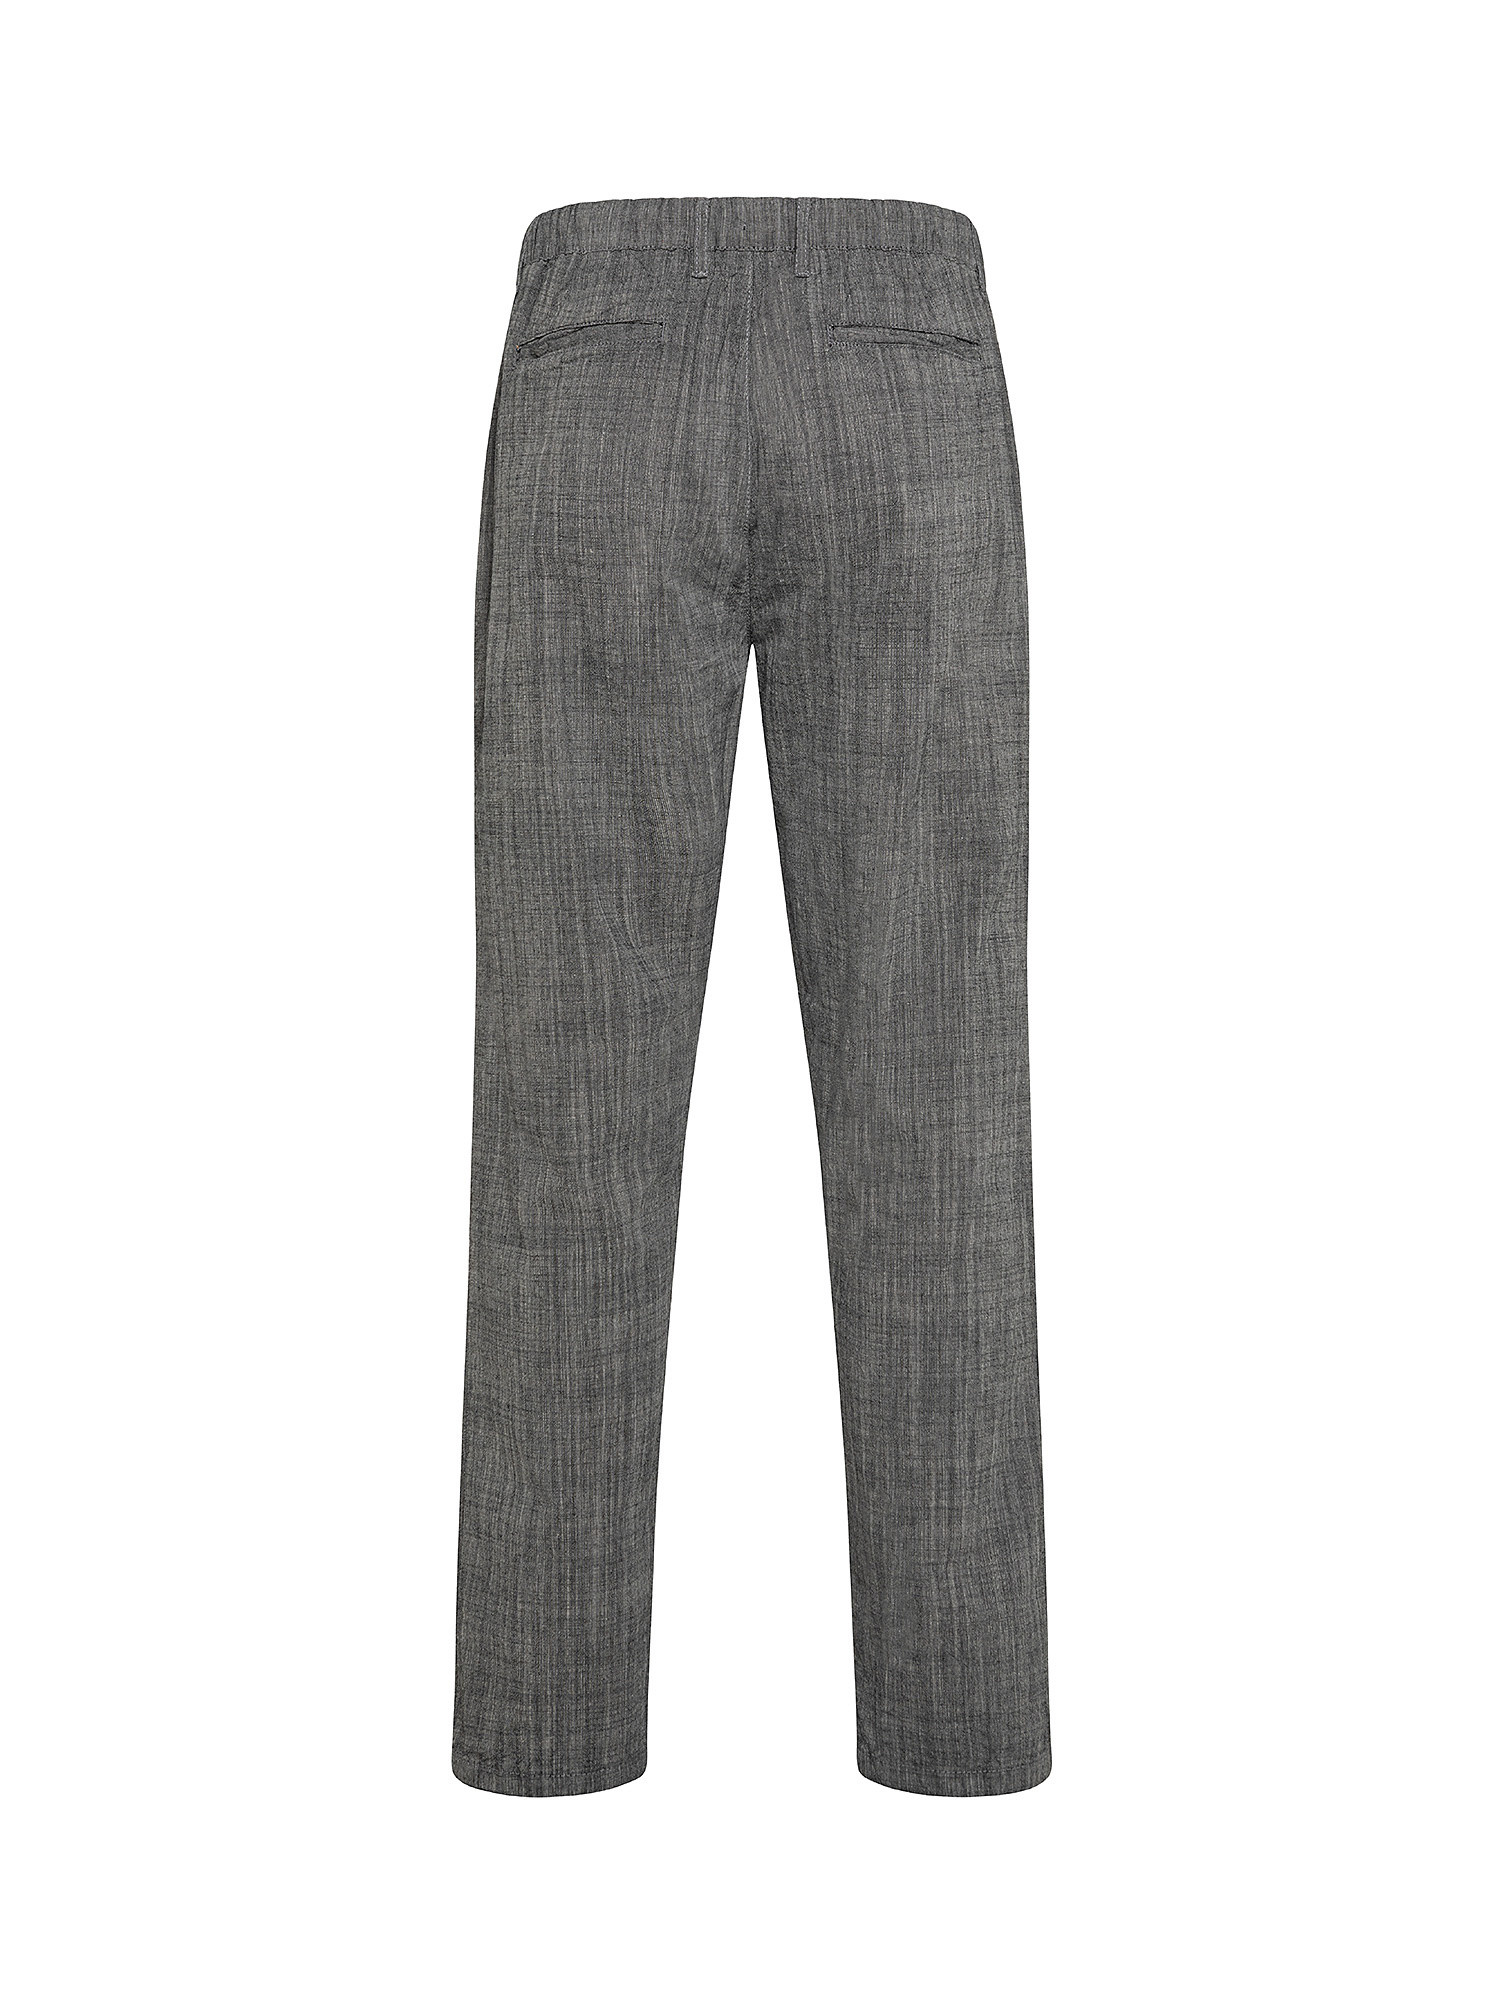 Trousers with drawstring, Grey, large image number 1